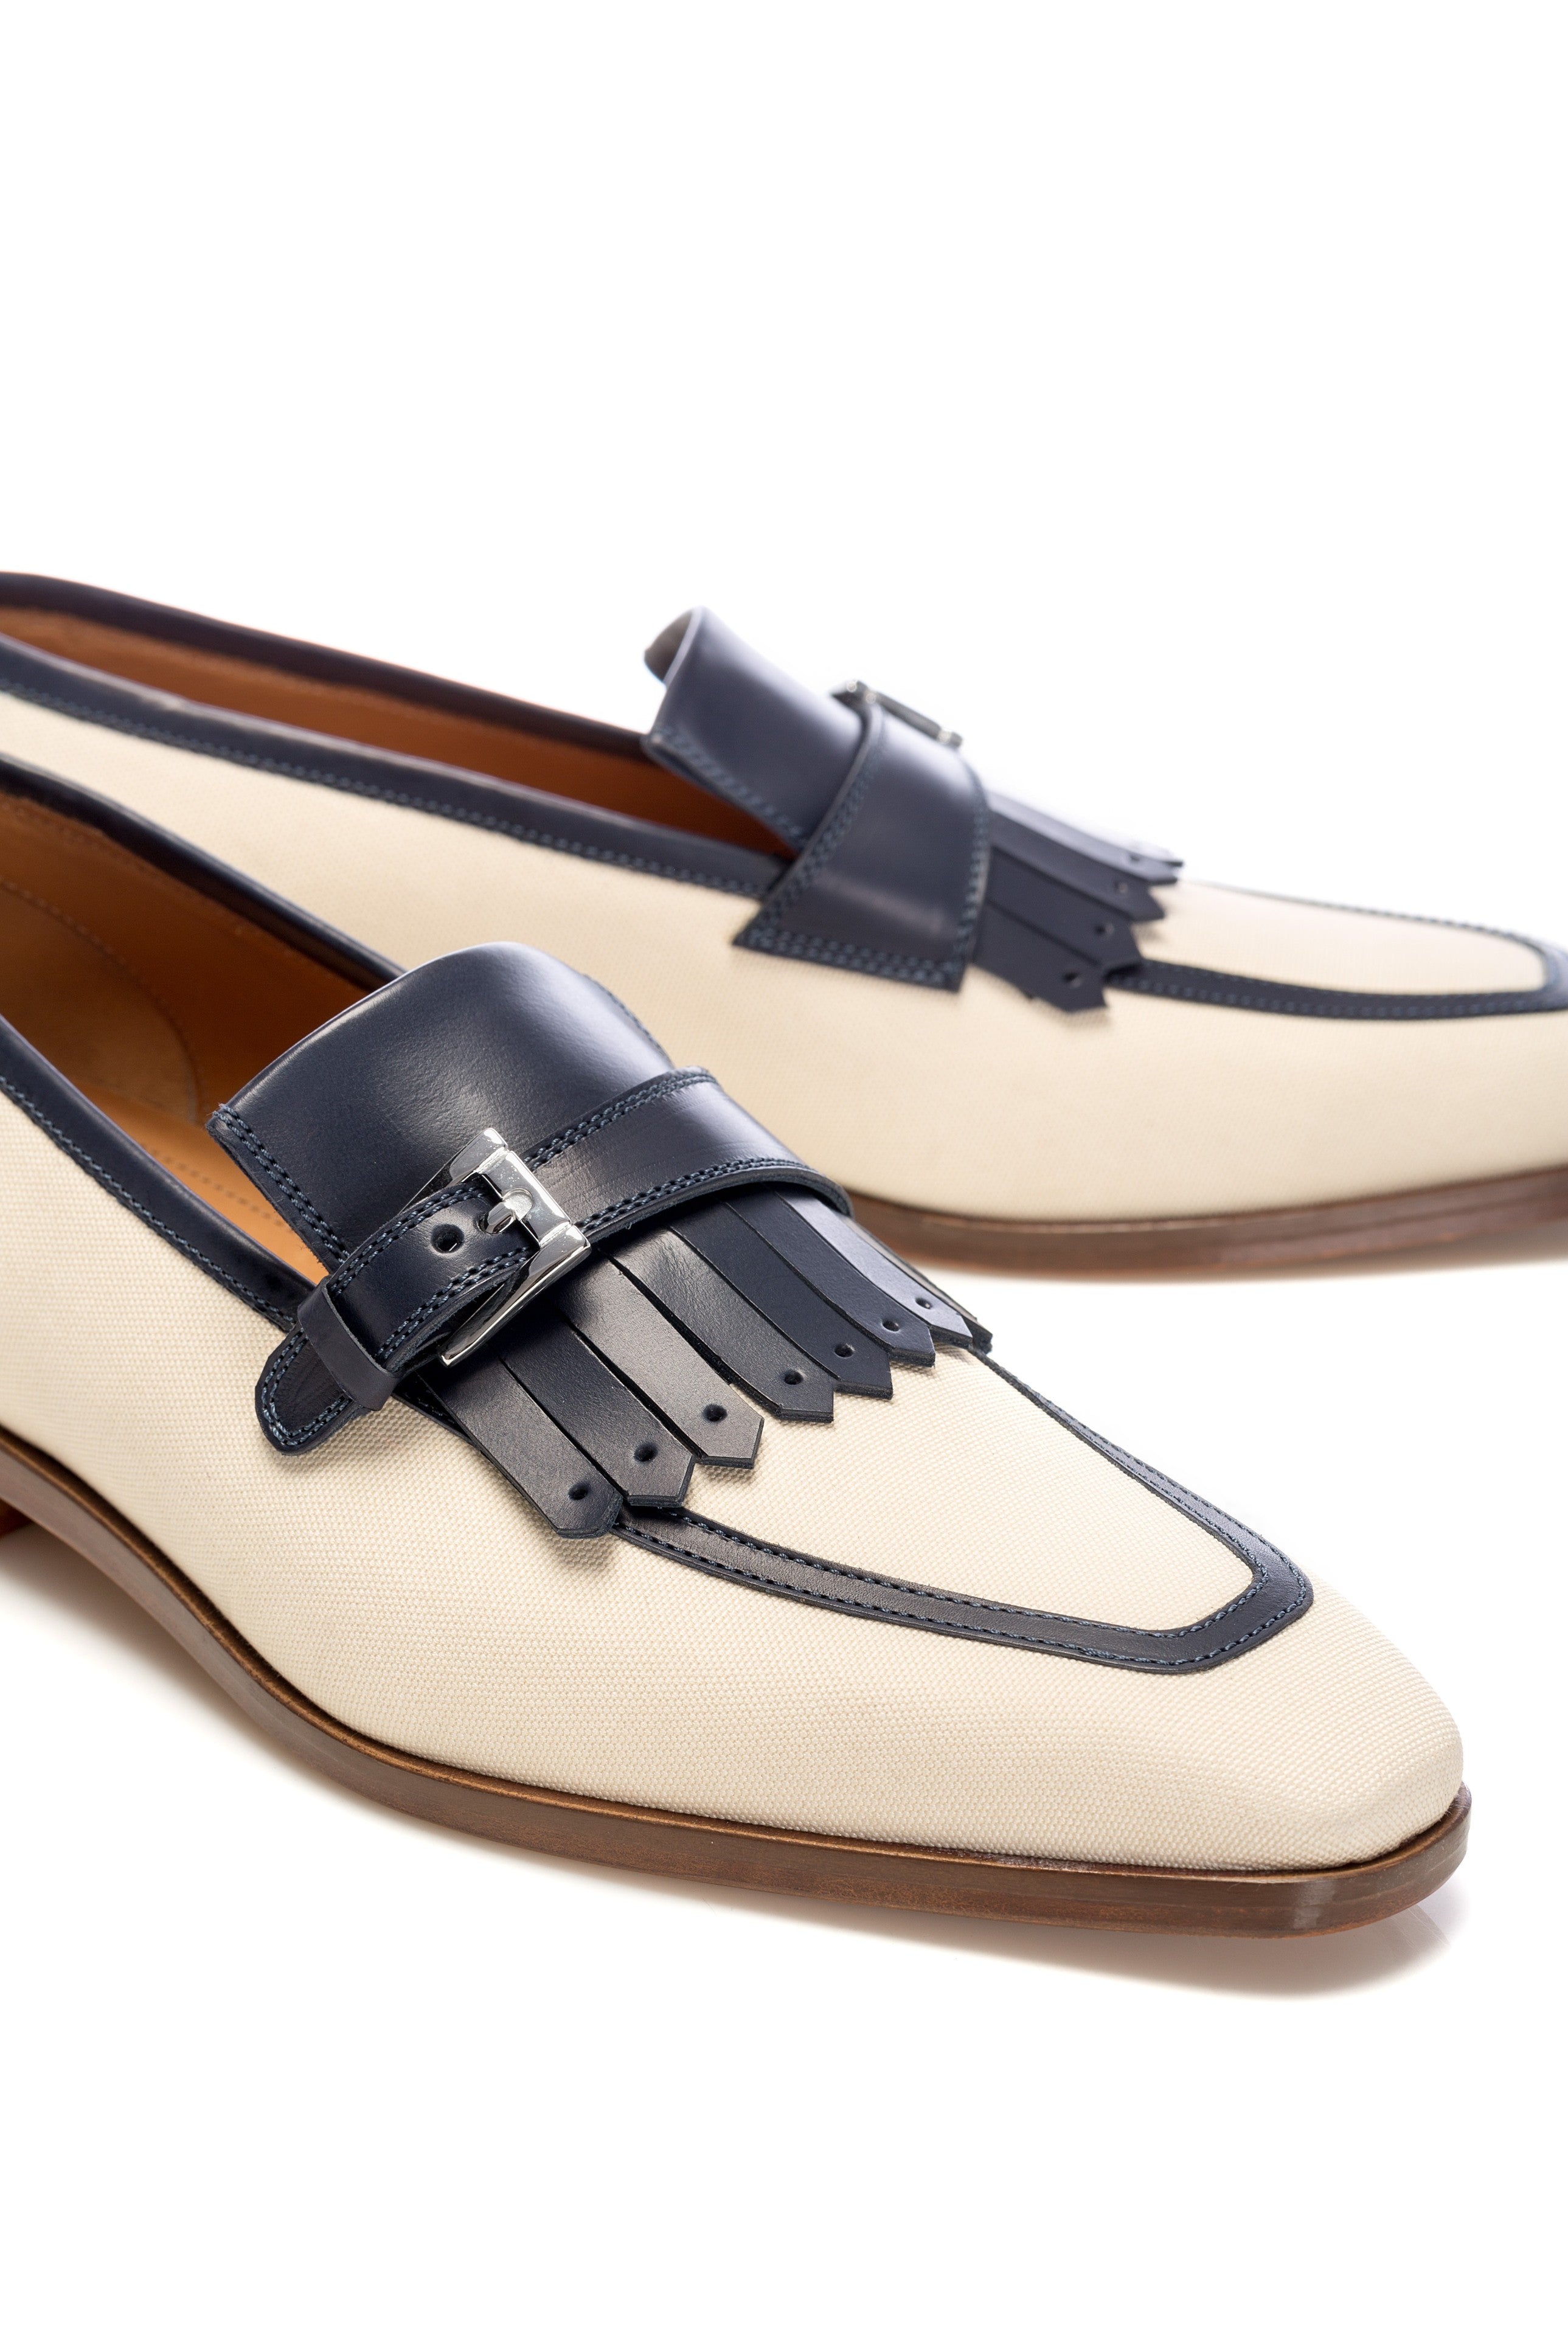 Two-tone leather and textile tassel moccasins